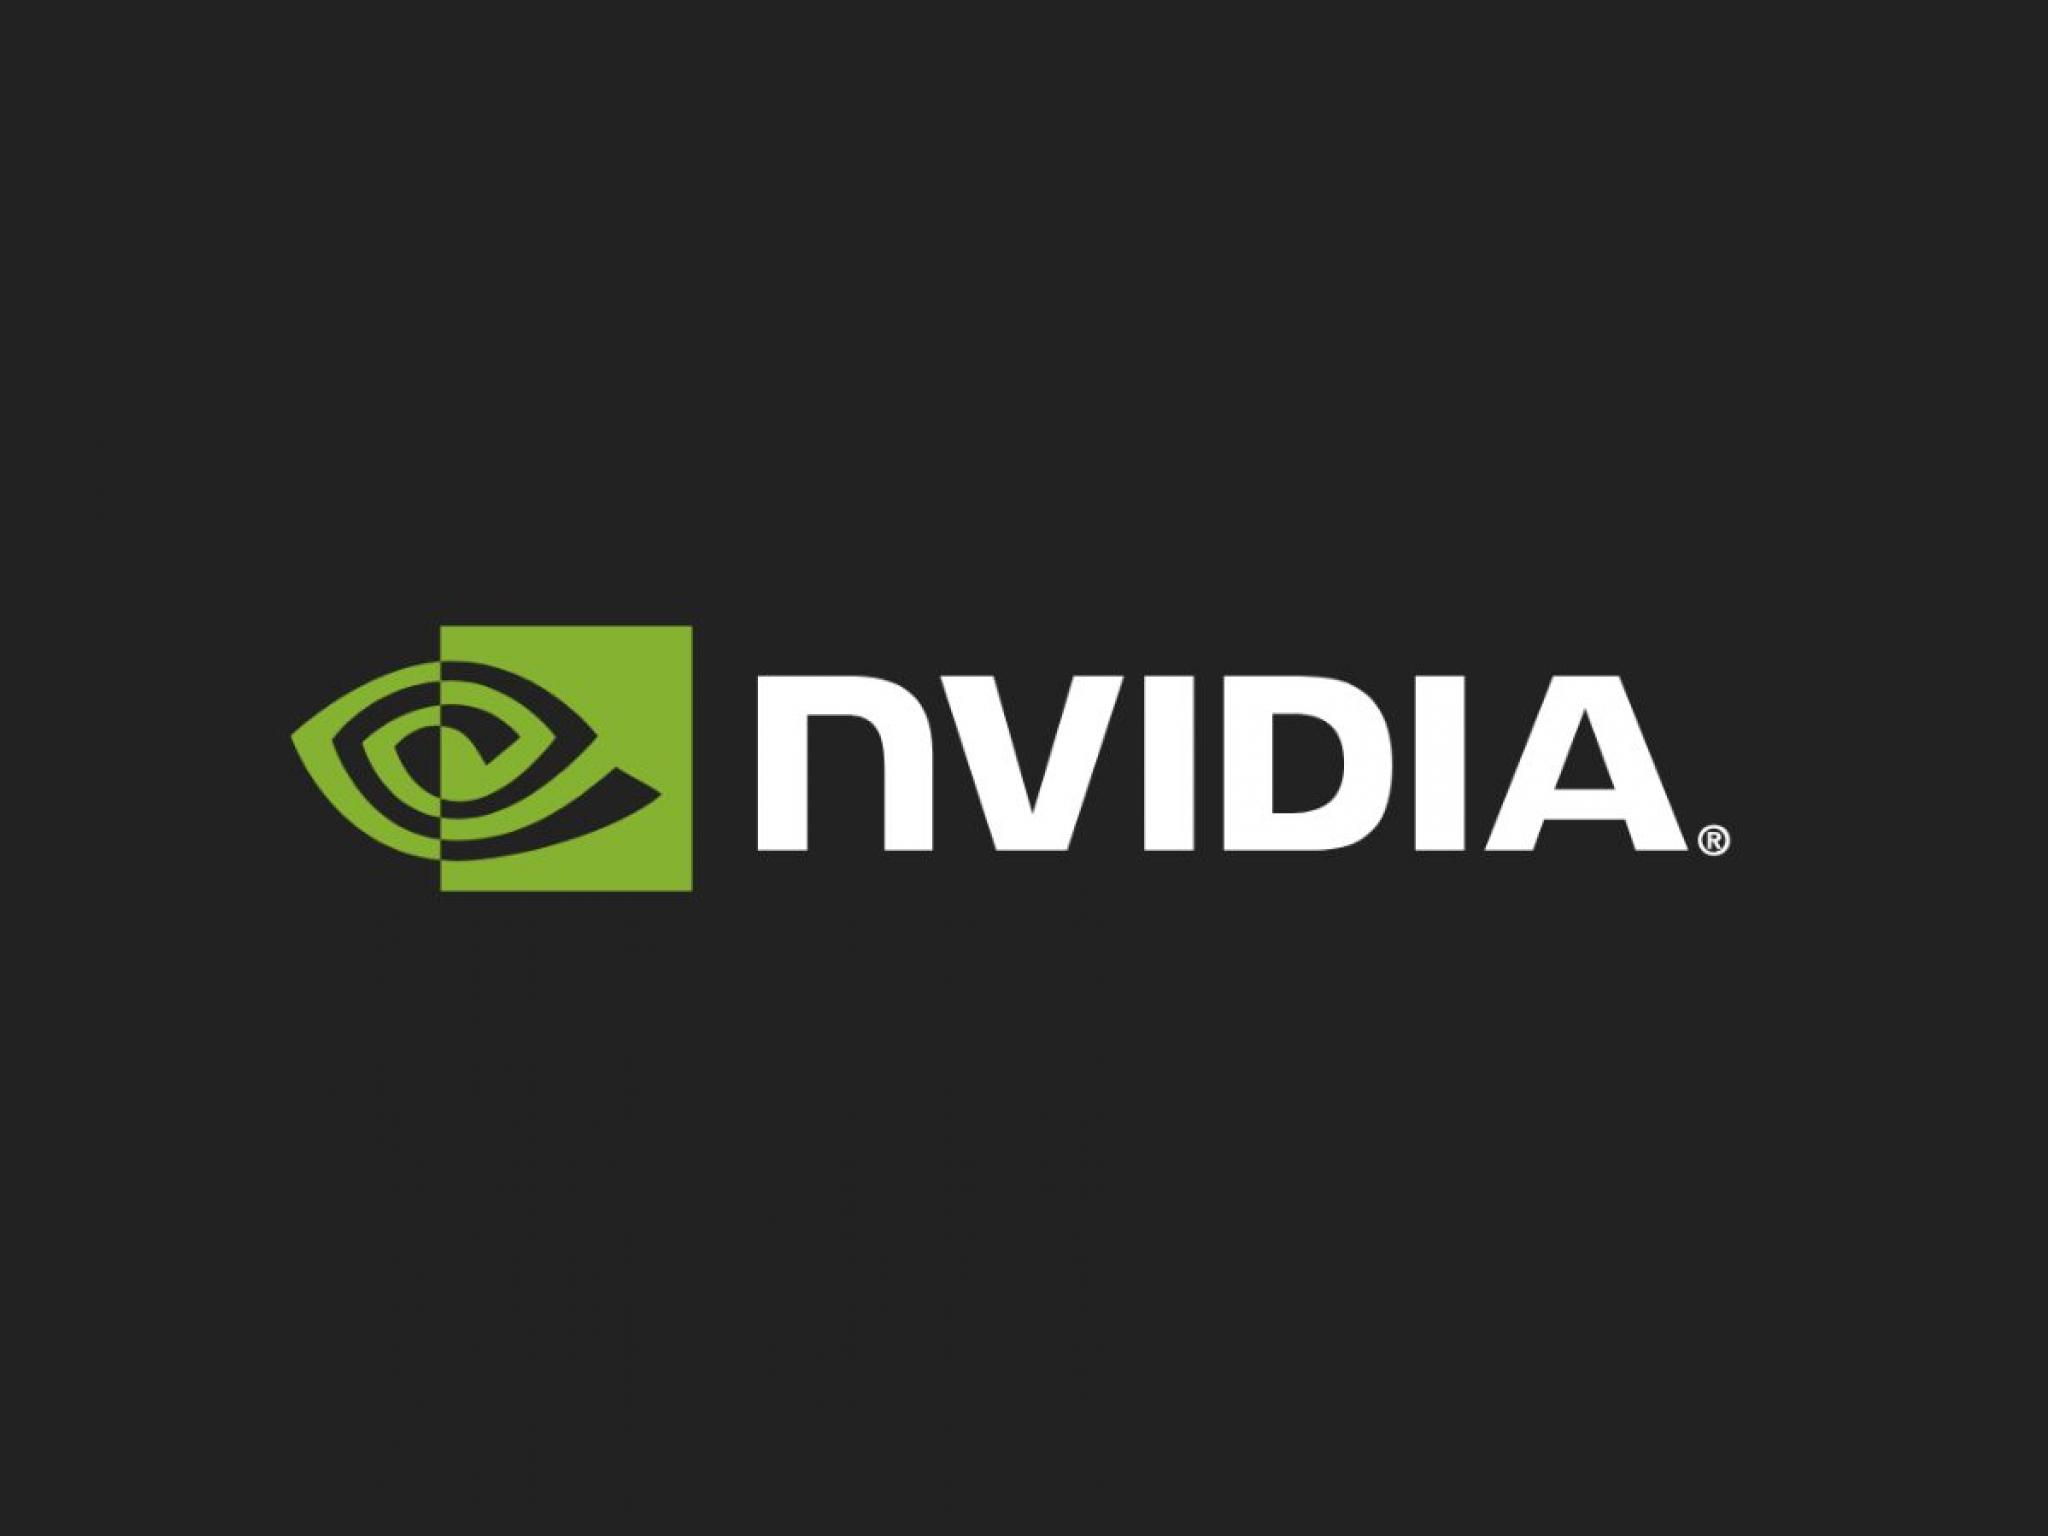  nvidia-to-rally-more-than-133-here-are-10-other-analyst-forecasts-for-thursday 